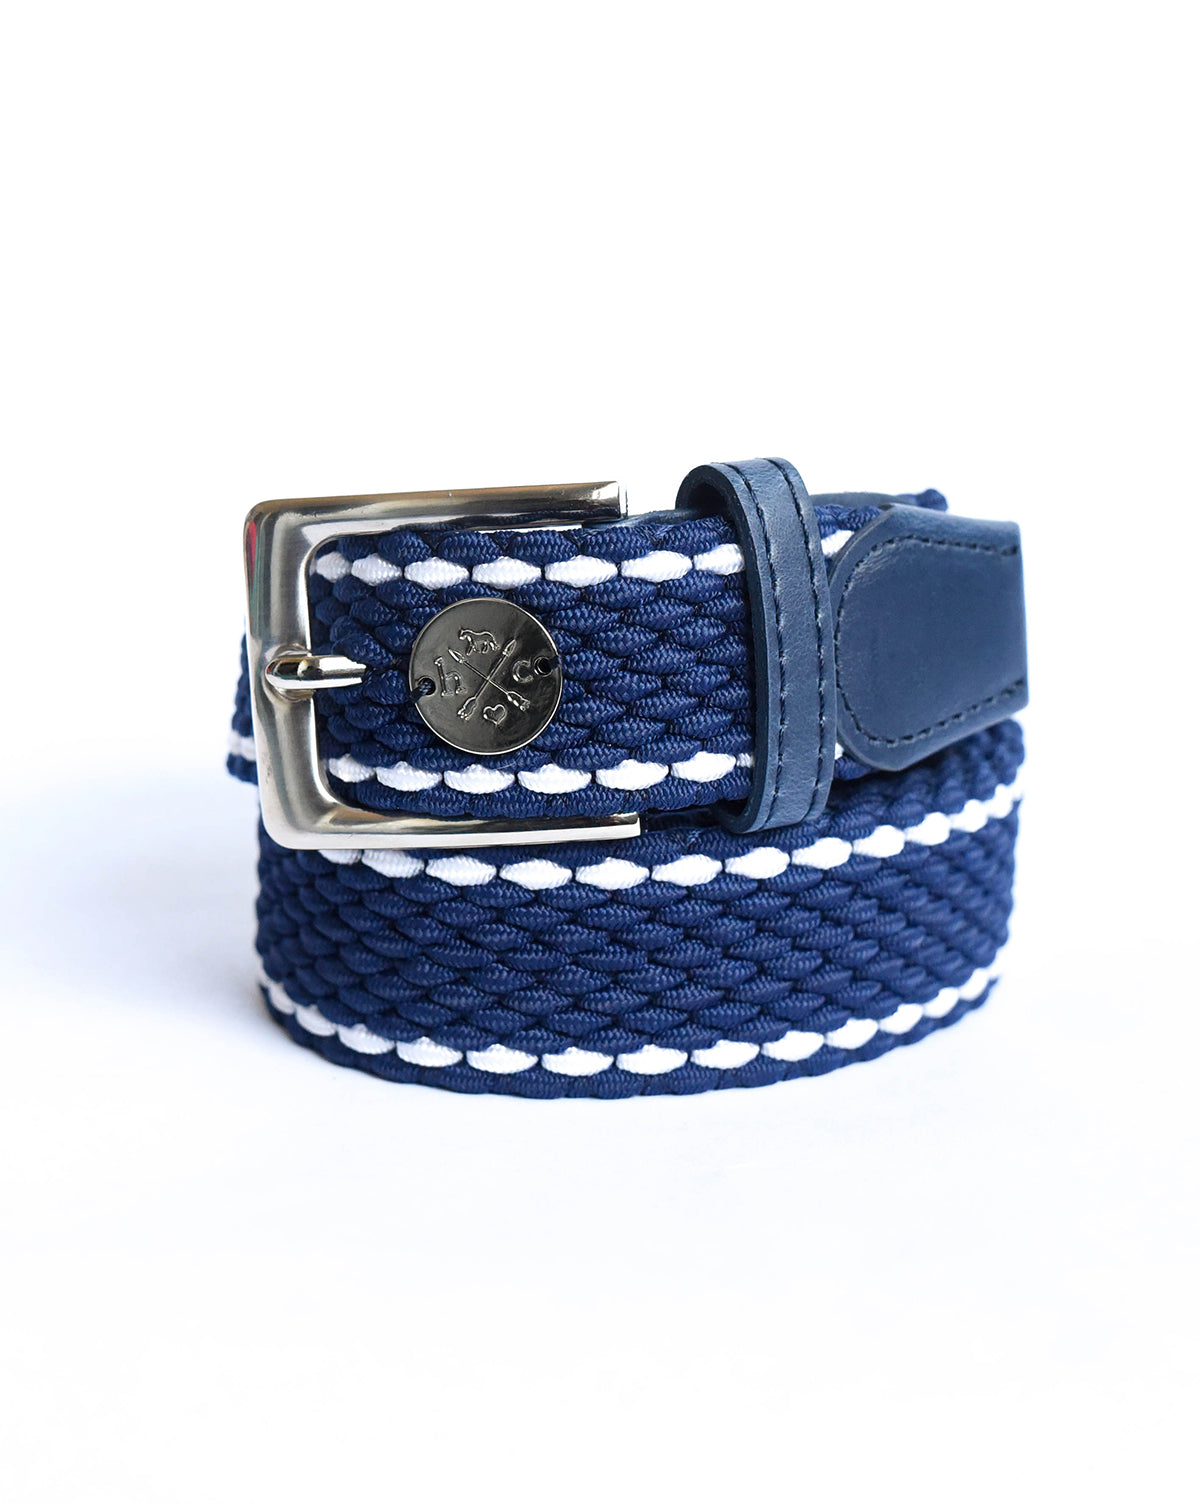 The Derby Belt - Navy Leather Classic Day